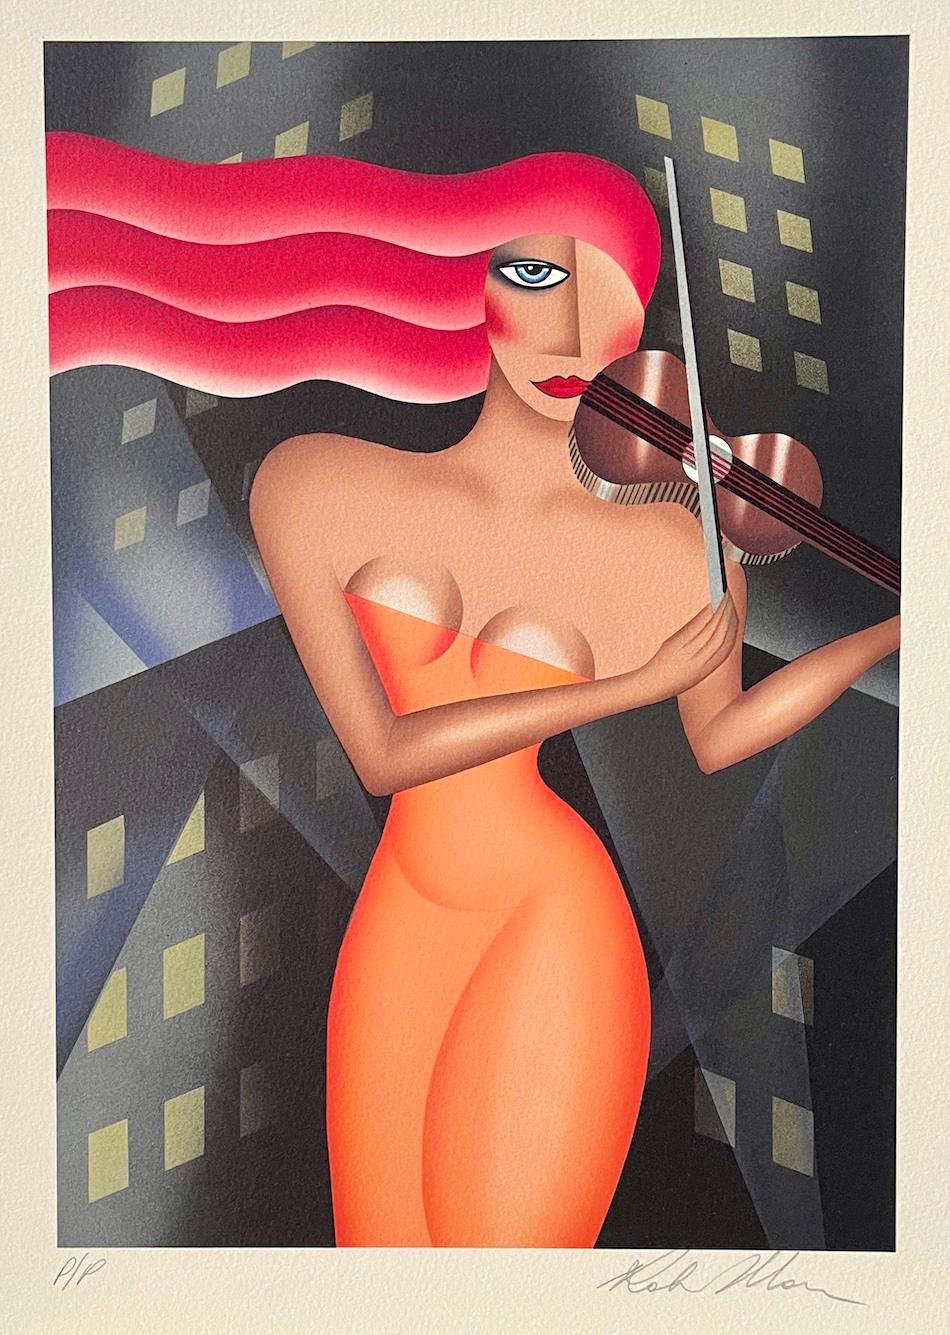 URBAN SERENADE Signed Lithograph, Woman Violinist, City Buildings Art Deco  - Print by Robin Morris